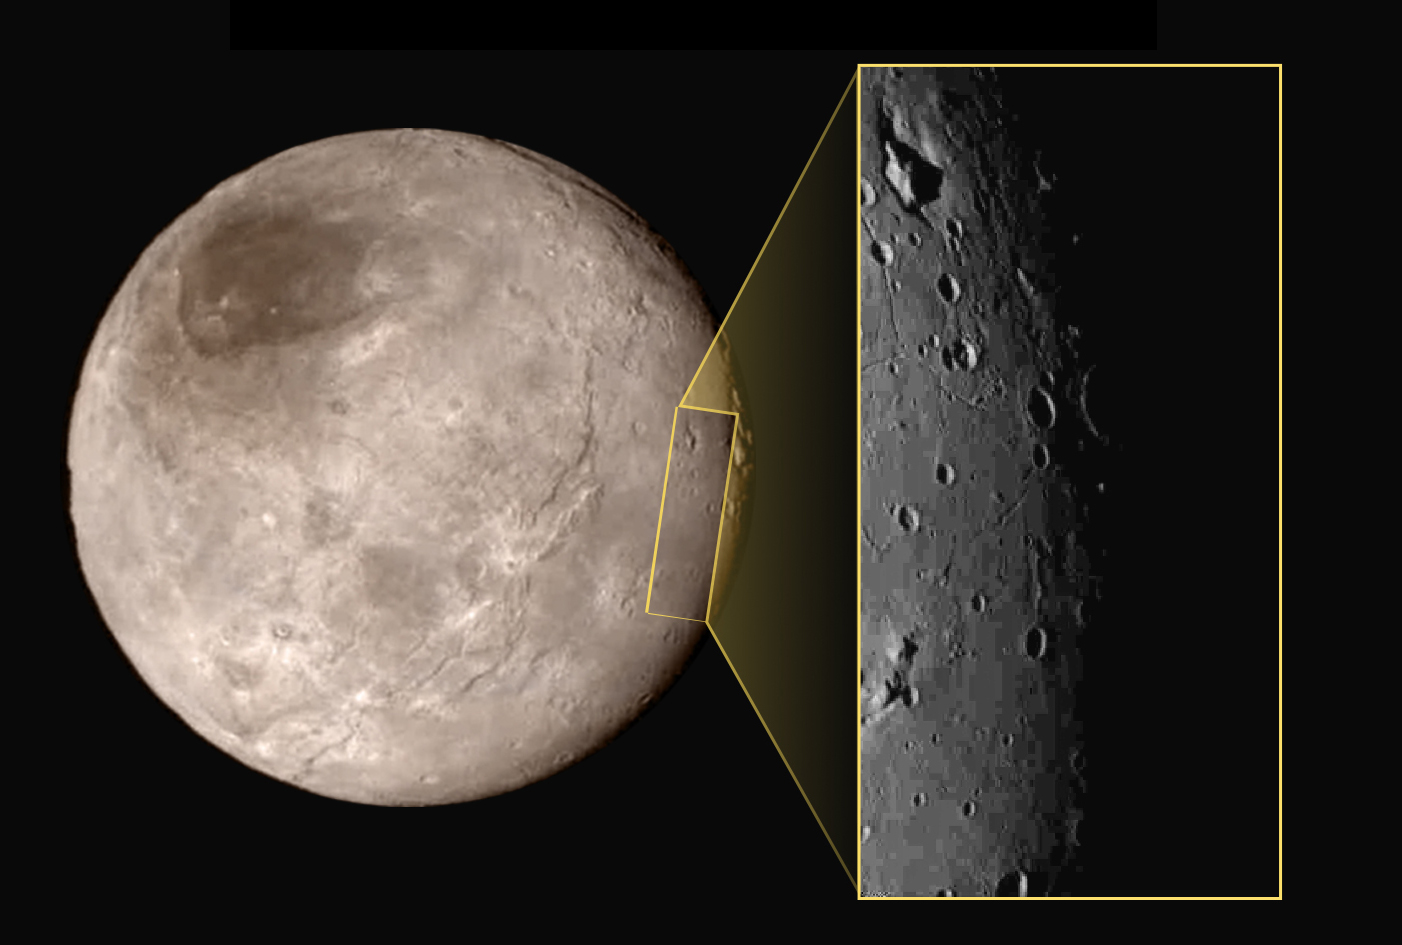 One of the most unusual features on Charon is the “mountain in a moat,” a large mountainous block sitting inside a depression in the surface. Image Credit: NASA/JHUAPL/SwRI